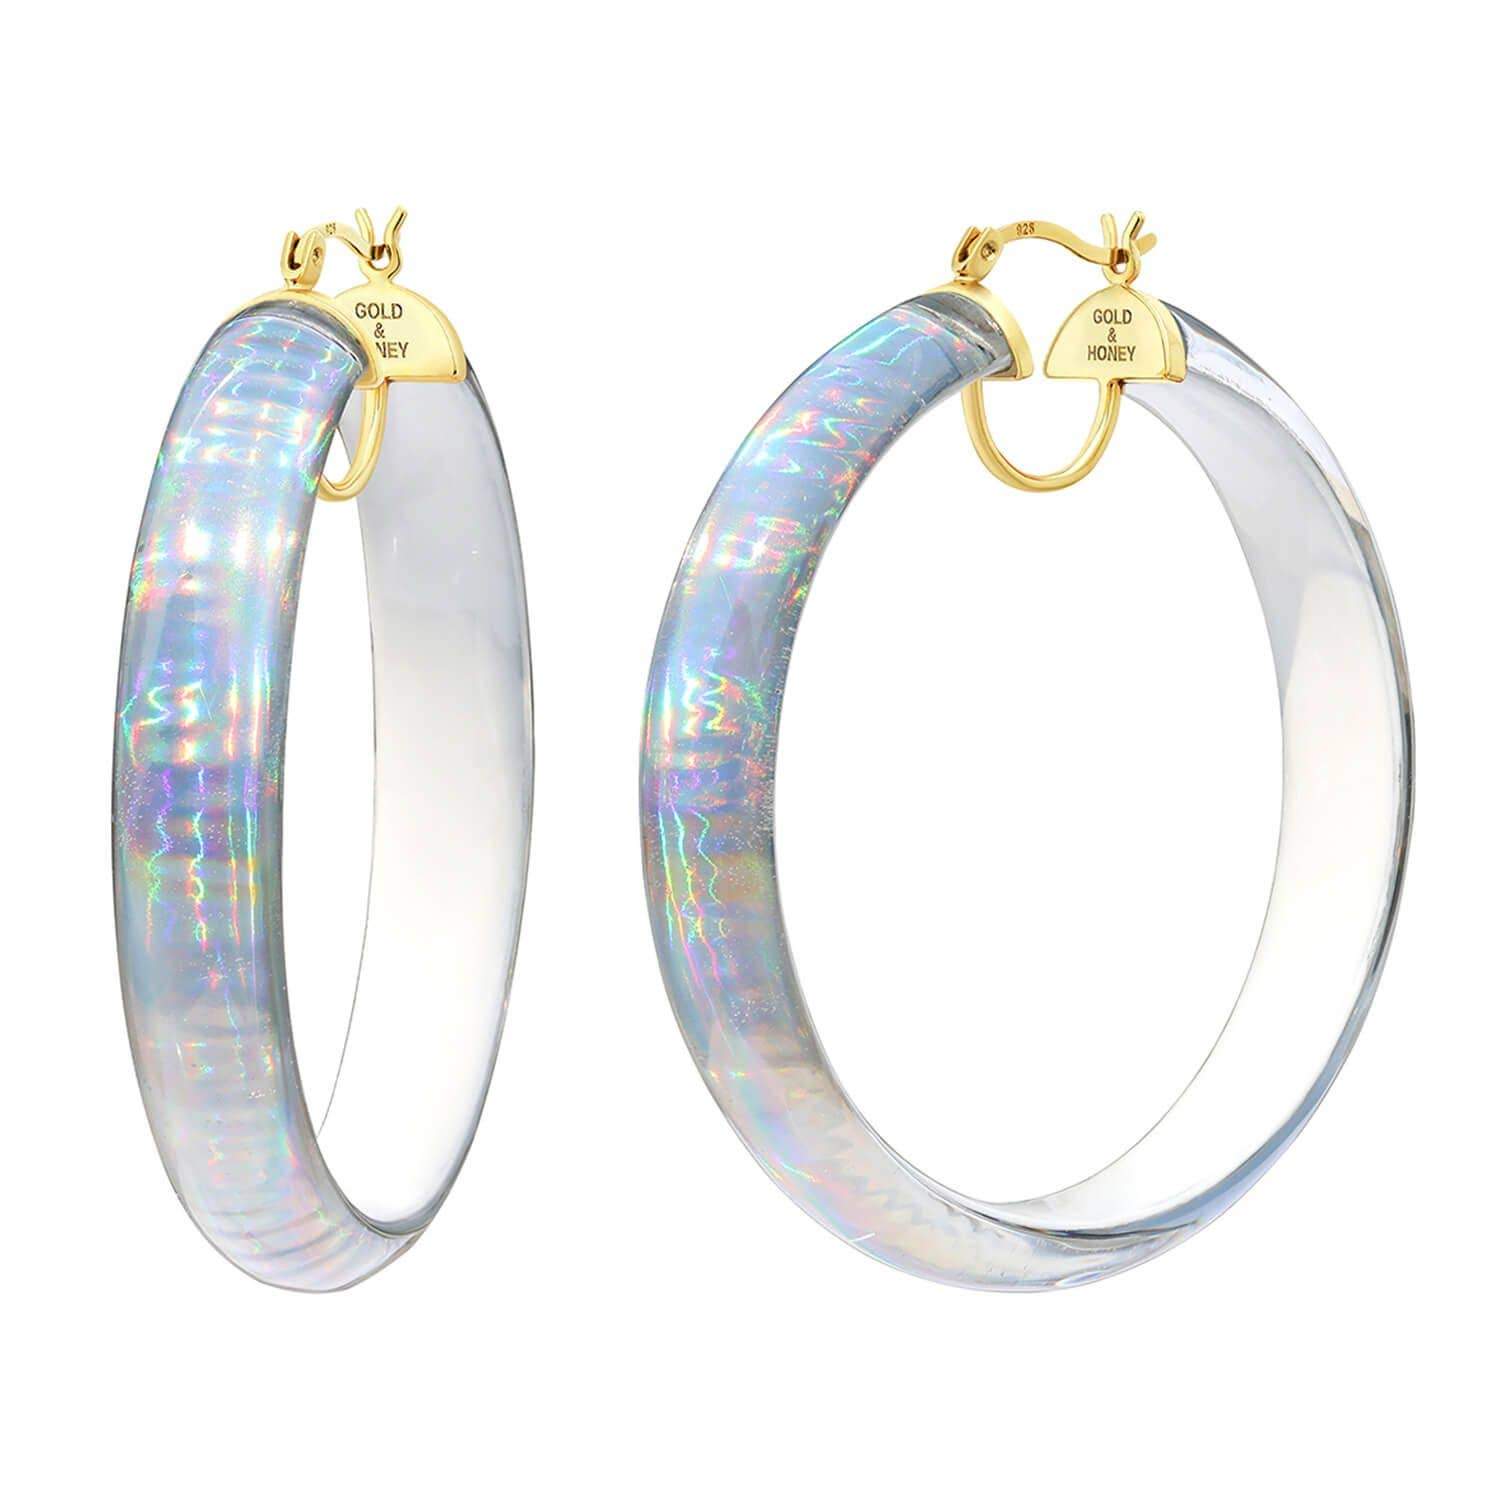 White Iridescent Lucite Hoops